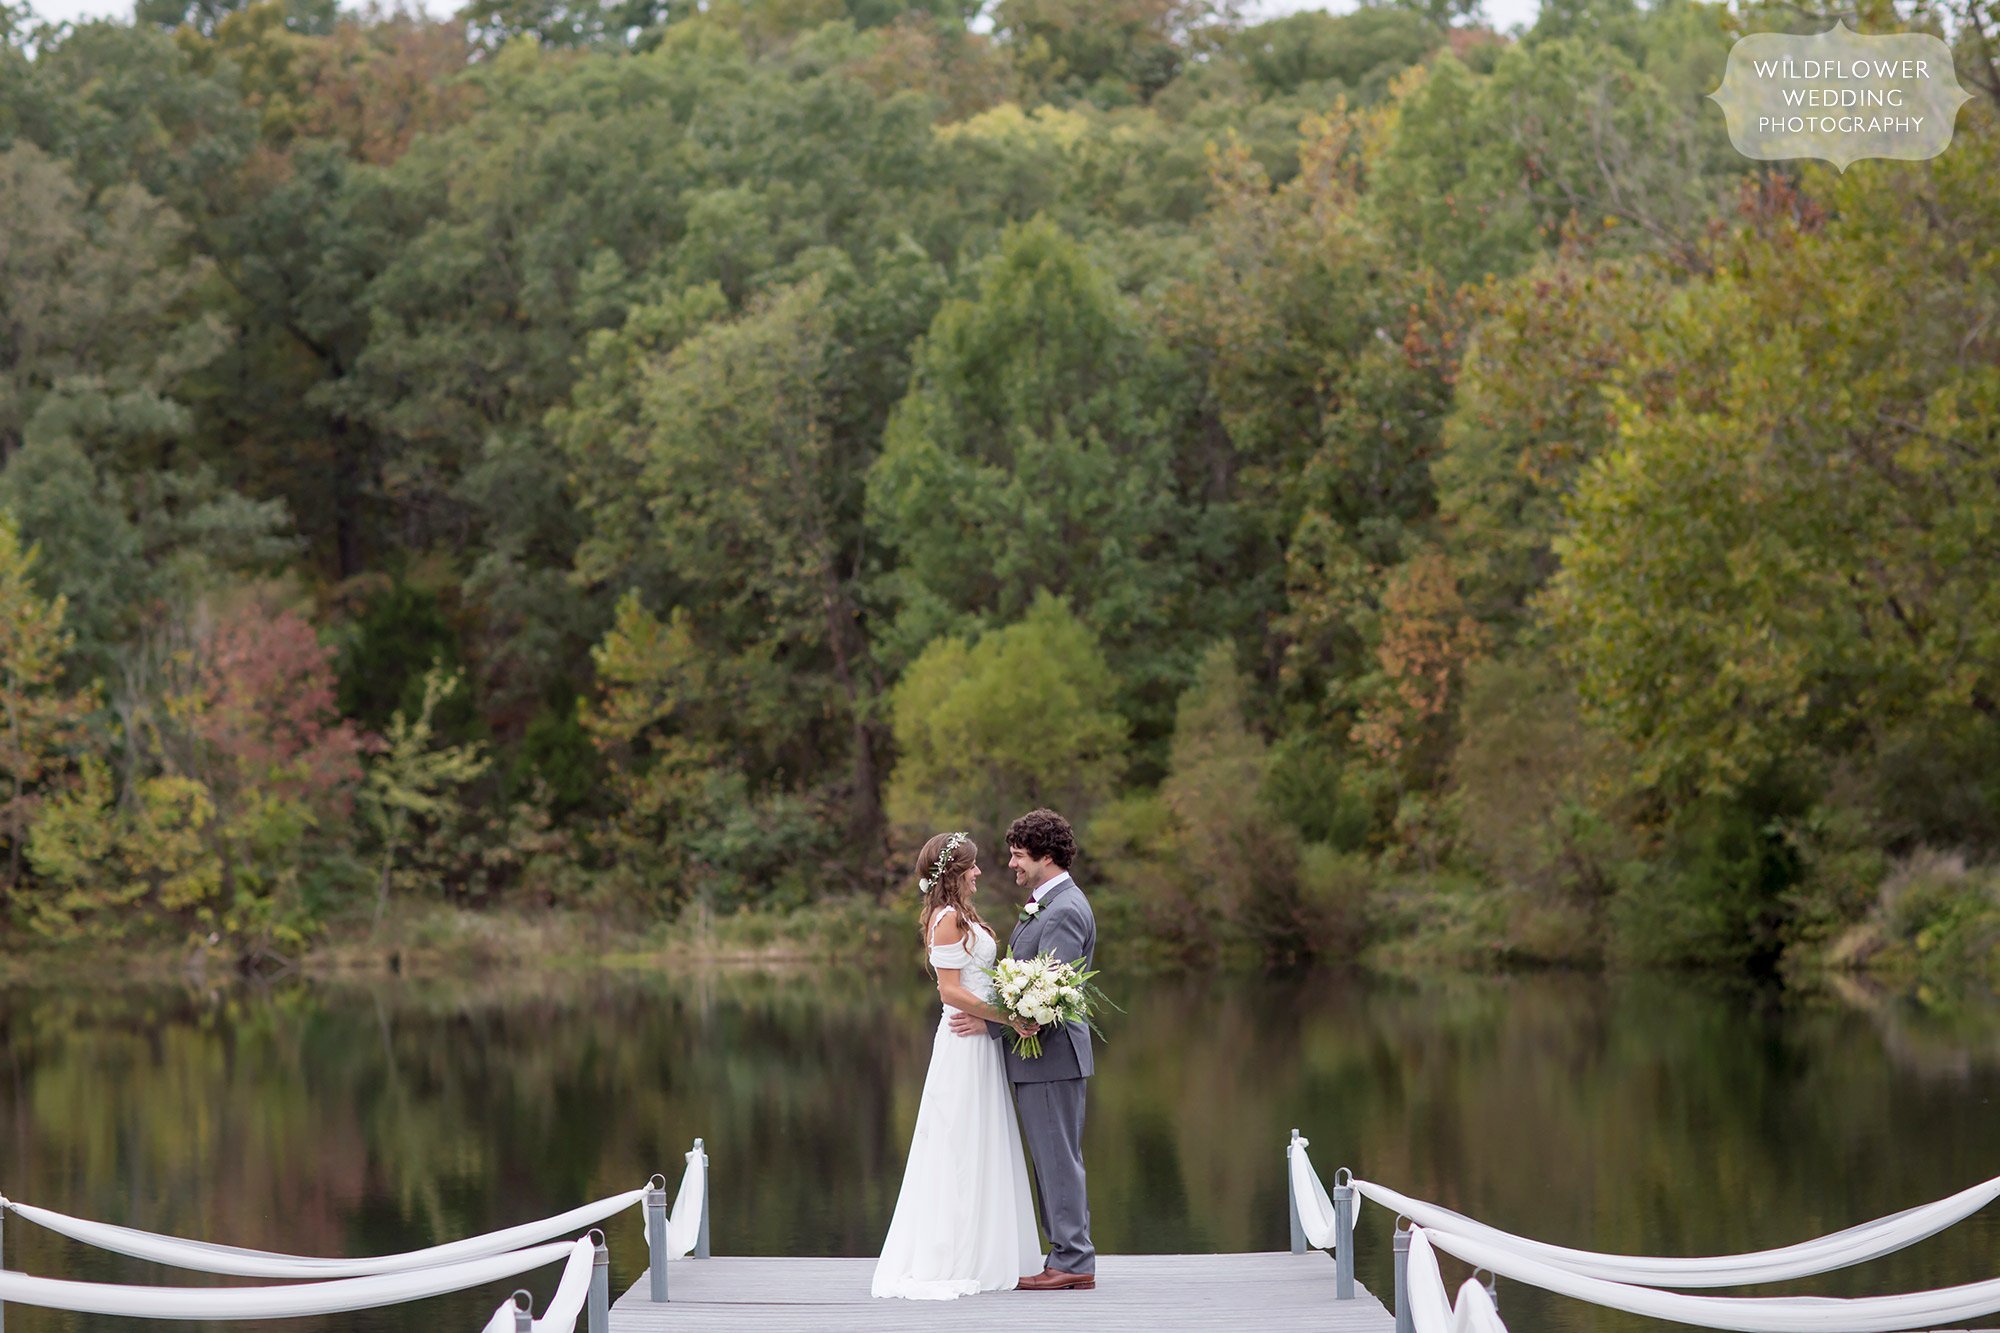 The bride and groom pose on the dock at their lakeside wedding in Hermann, MO at Little Piney.